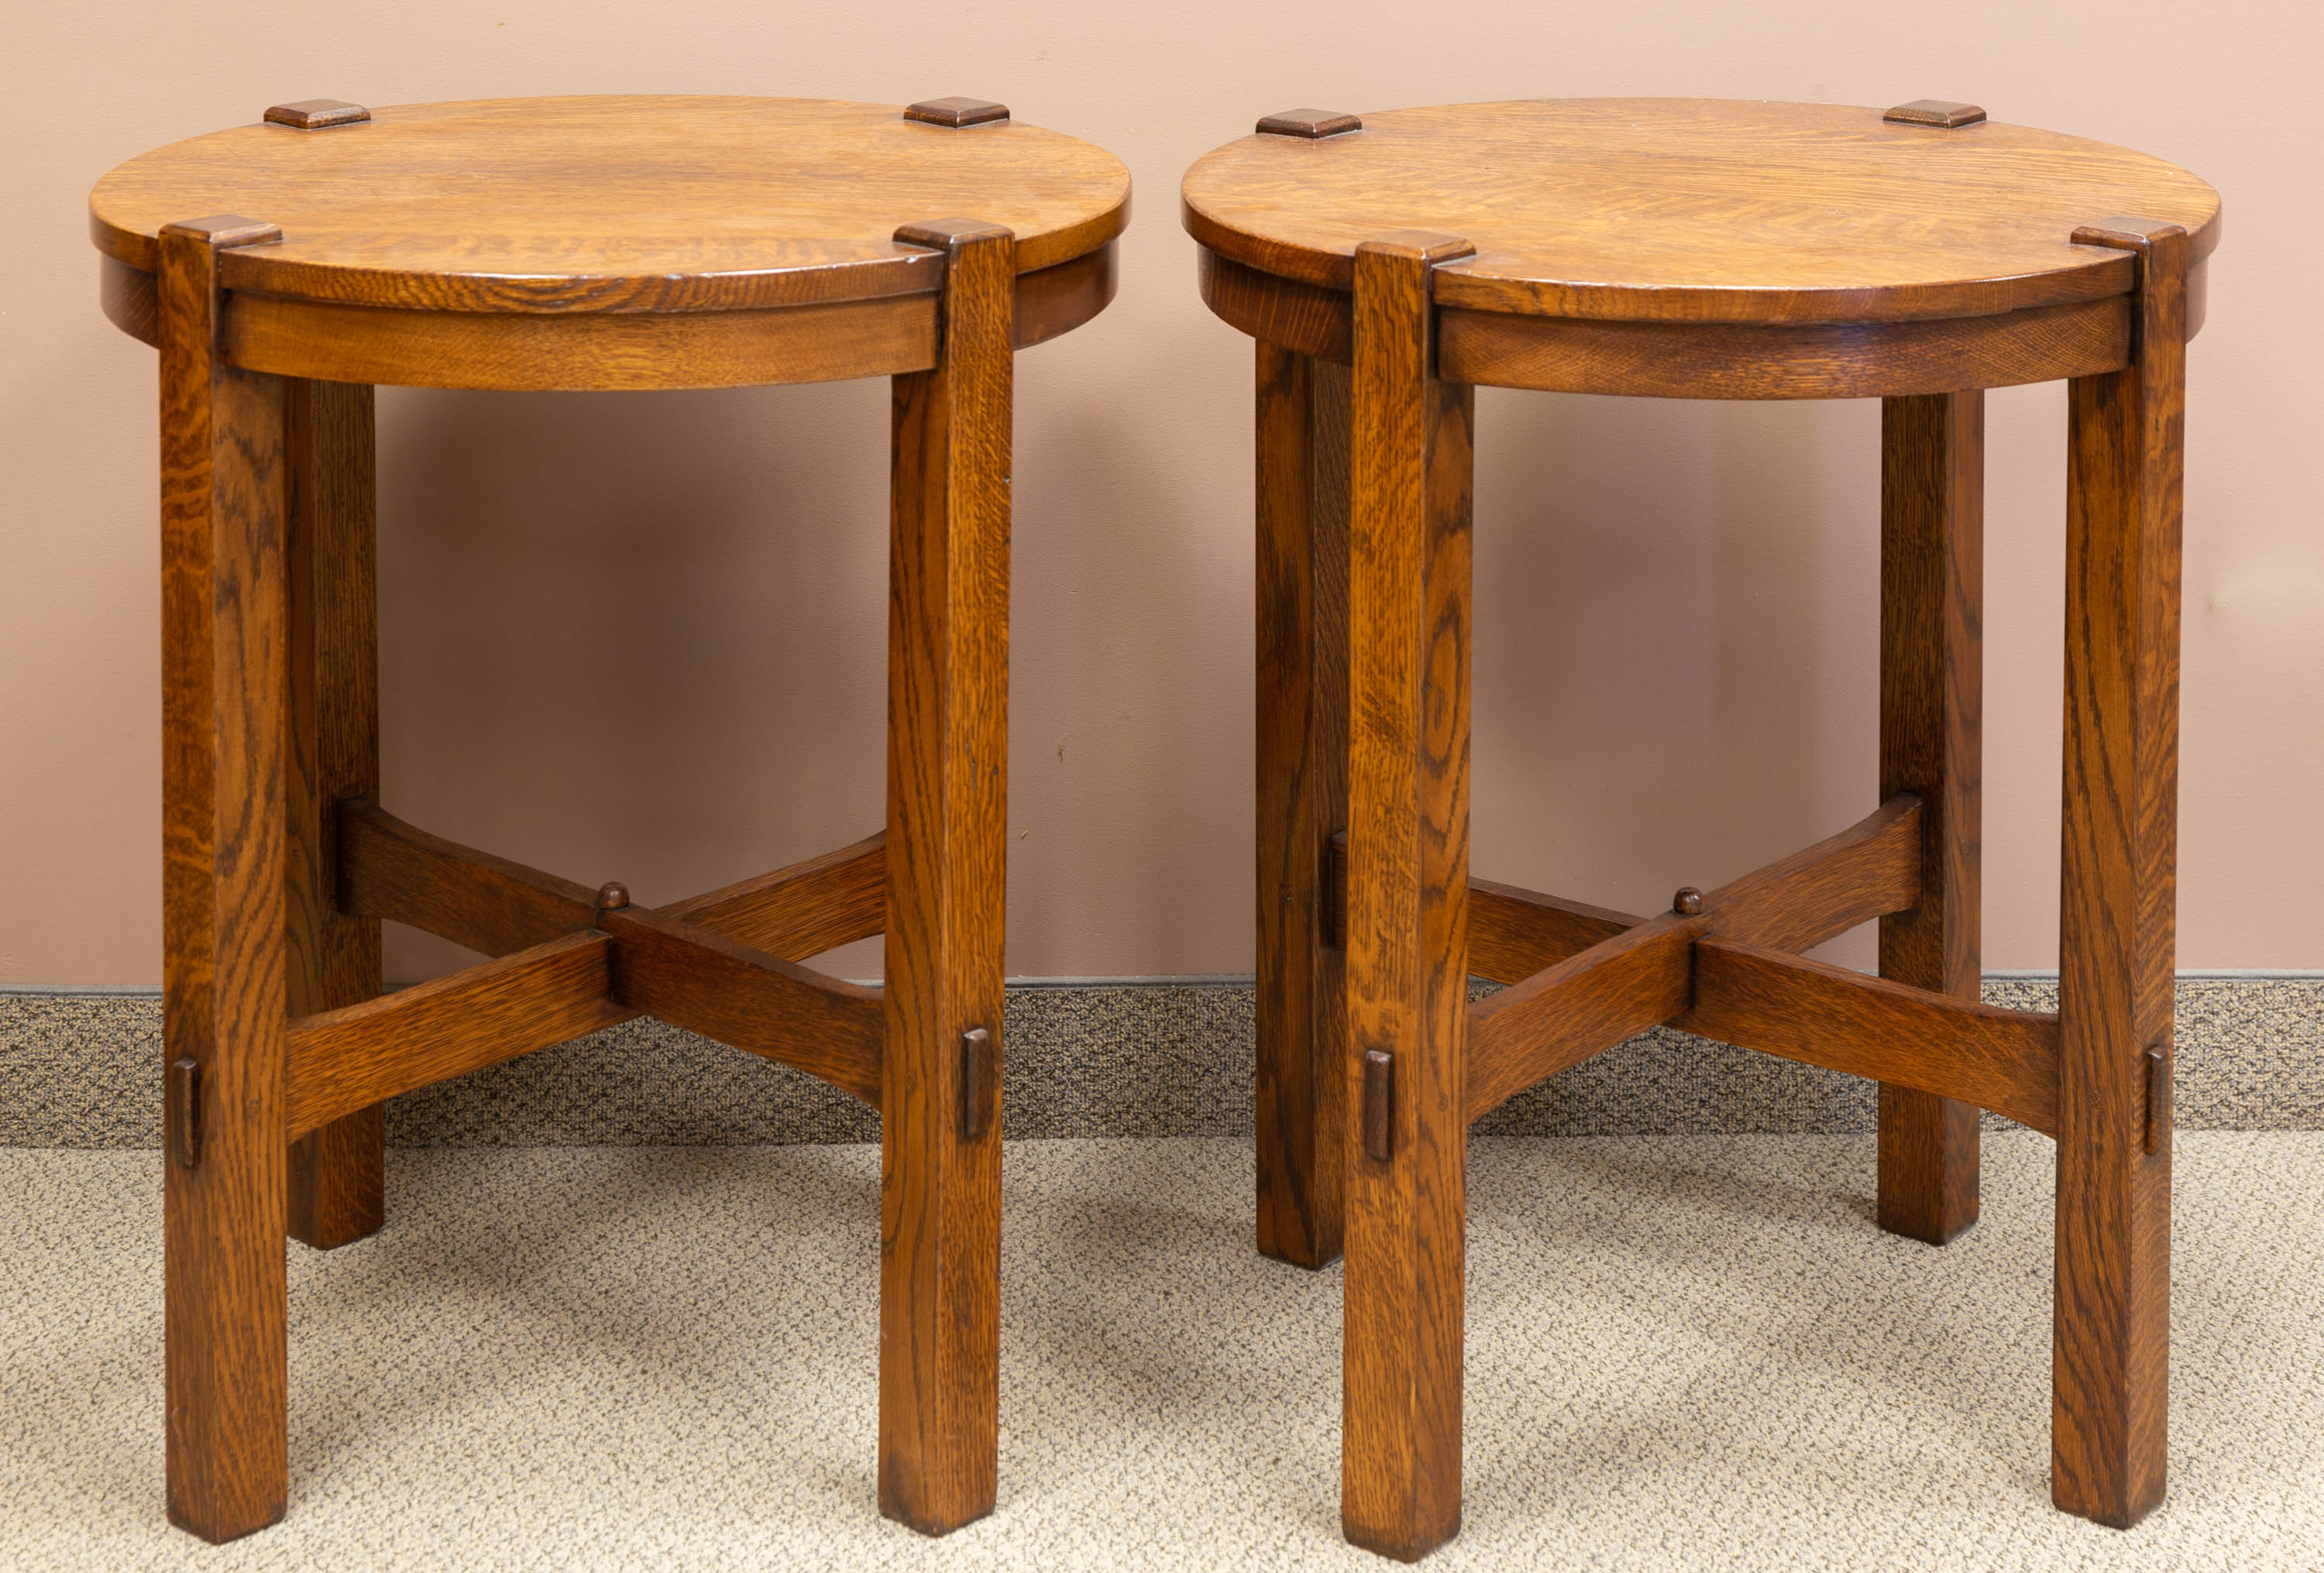 PAIR OF GUSTAV STICKELY SIDE TABLES